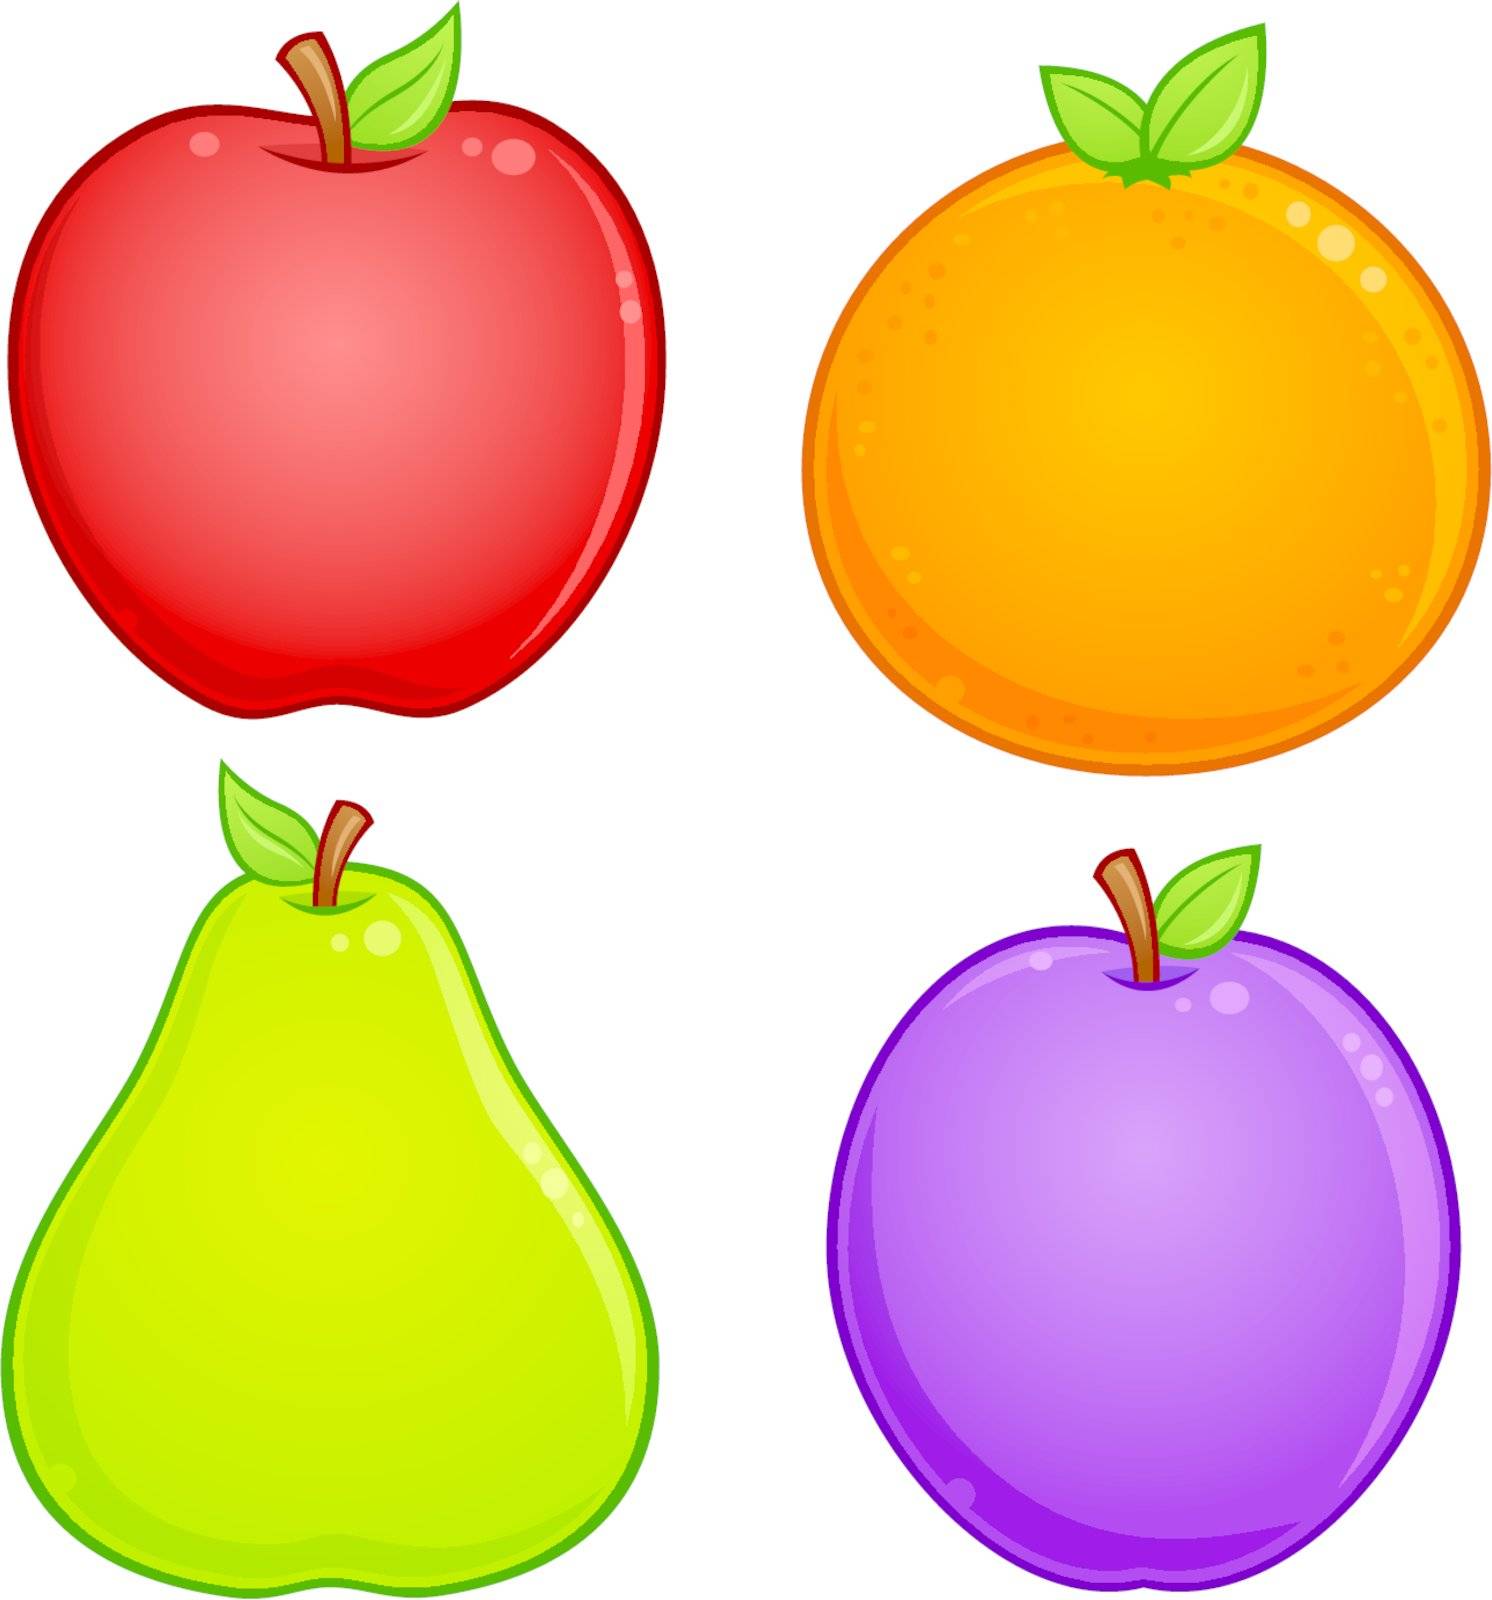 Vector cartoon illustration of various fruit. Apple, orange, pear and plum drawings included.